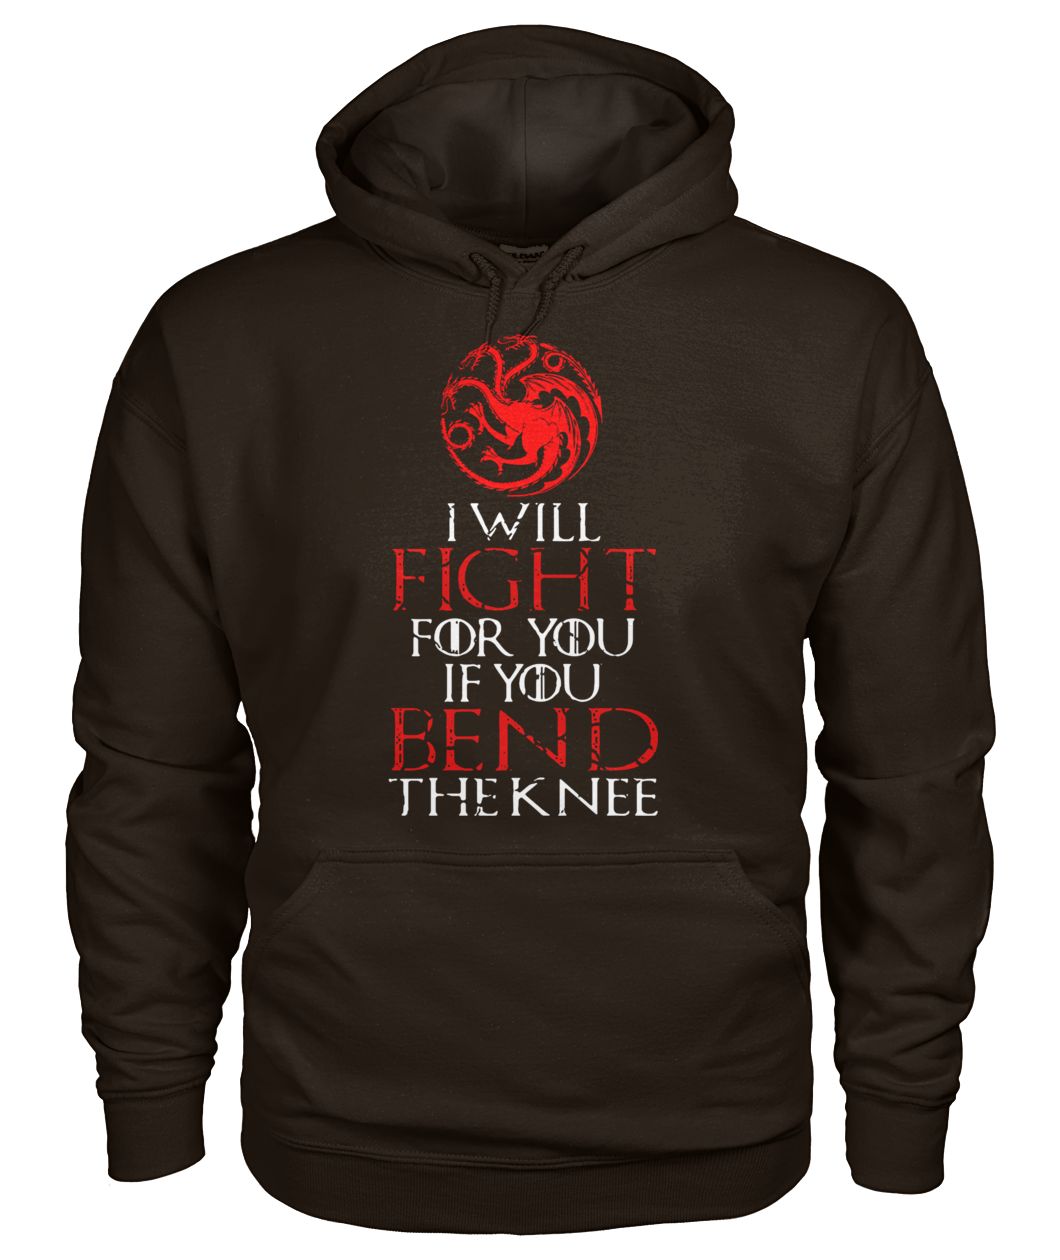 Game of thrones house targaryen I will fight for you if you bend the knee gildan hoodie